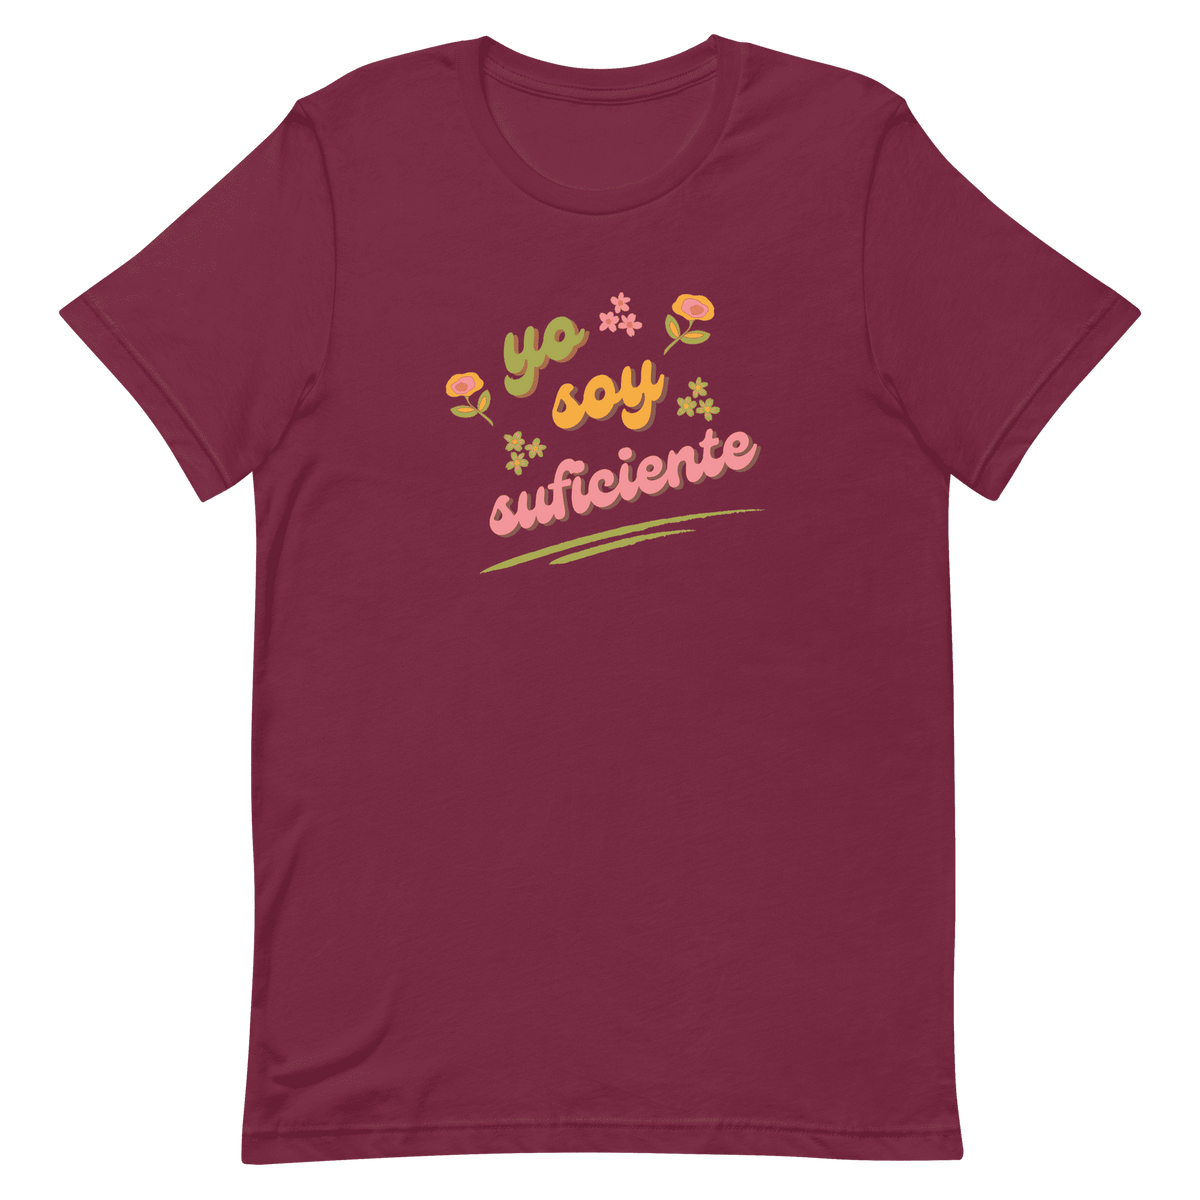 YO SOY SUFICIENTE - Spanish Inspirational Affirmation Graphic T-Shirt for Women | I Am Enough Collection